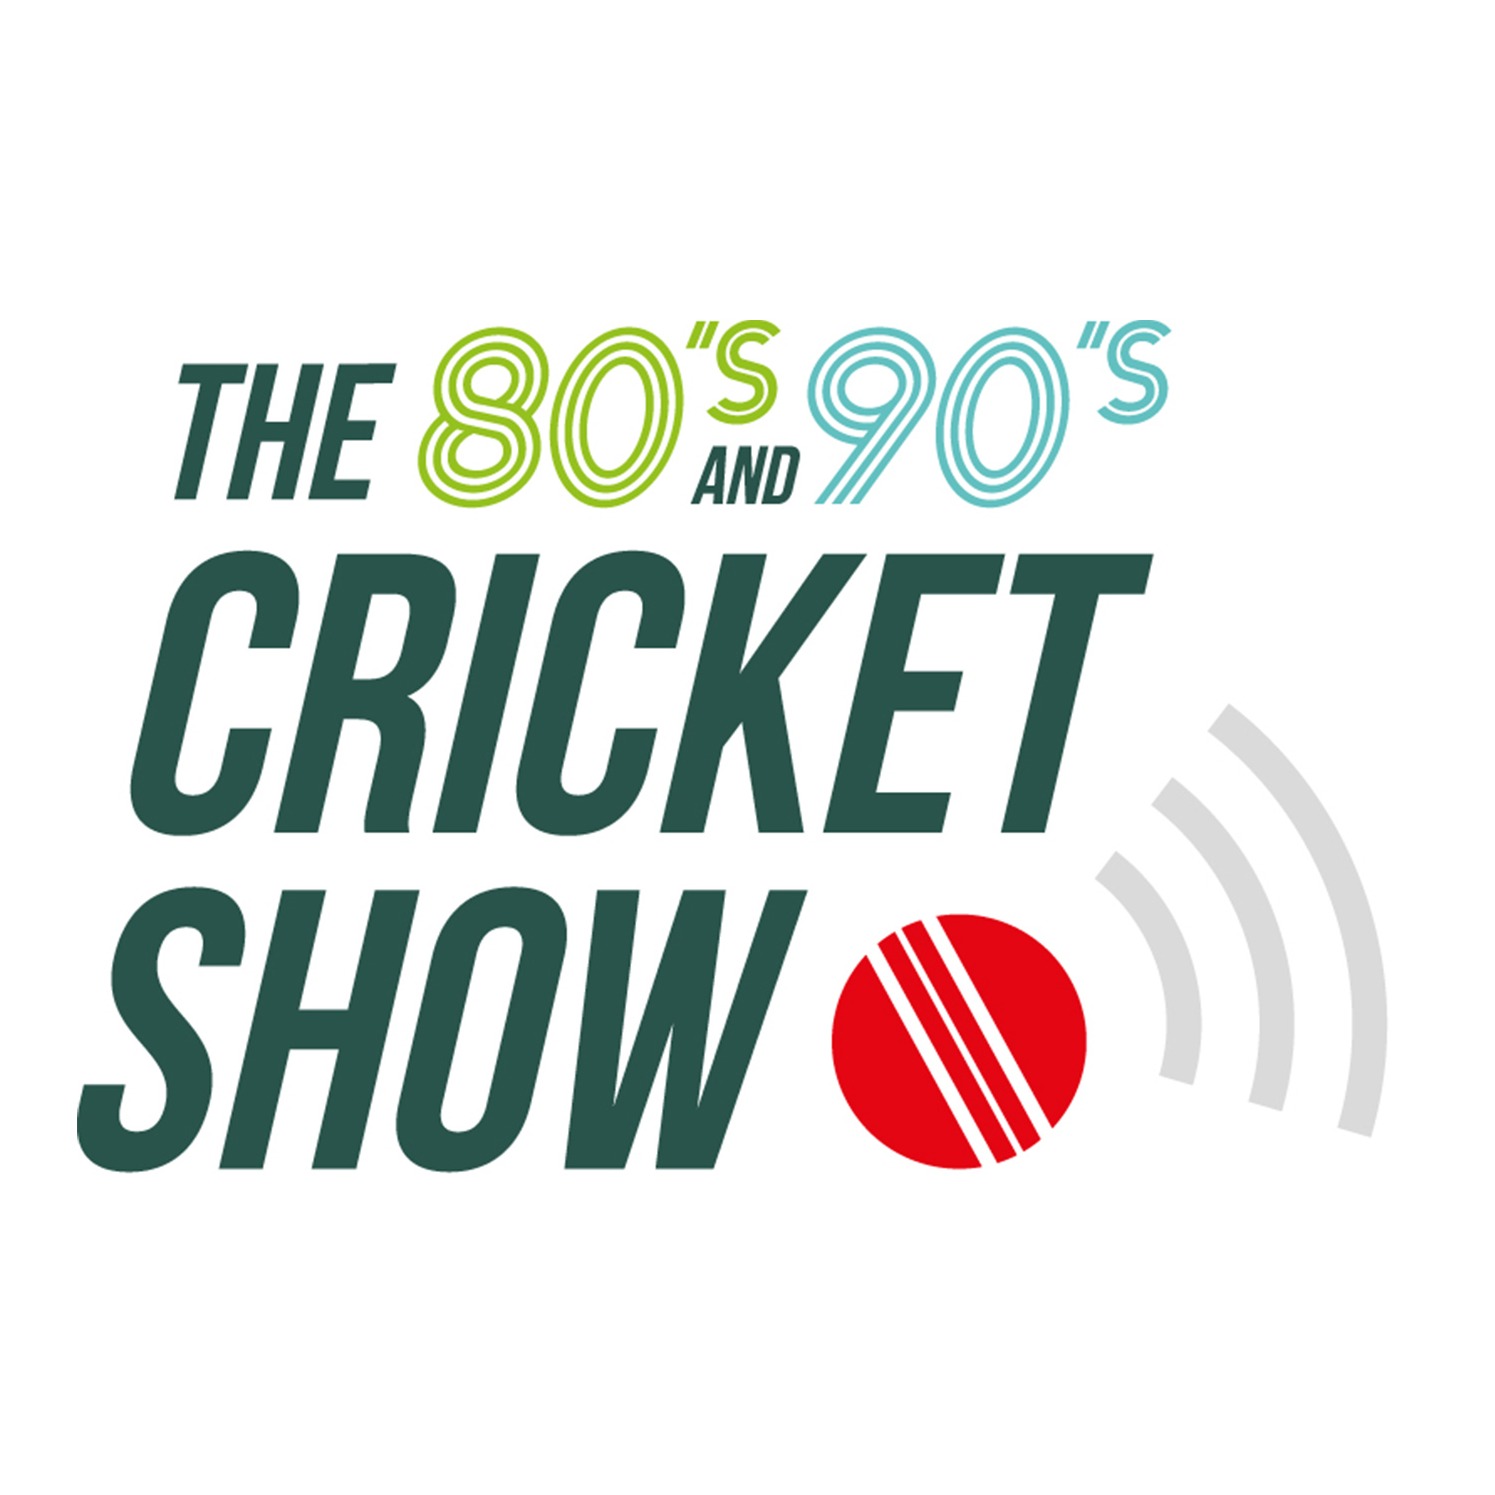 The 80s and 90s Cricket Show